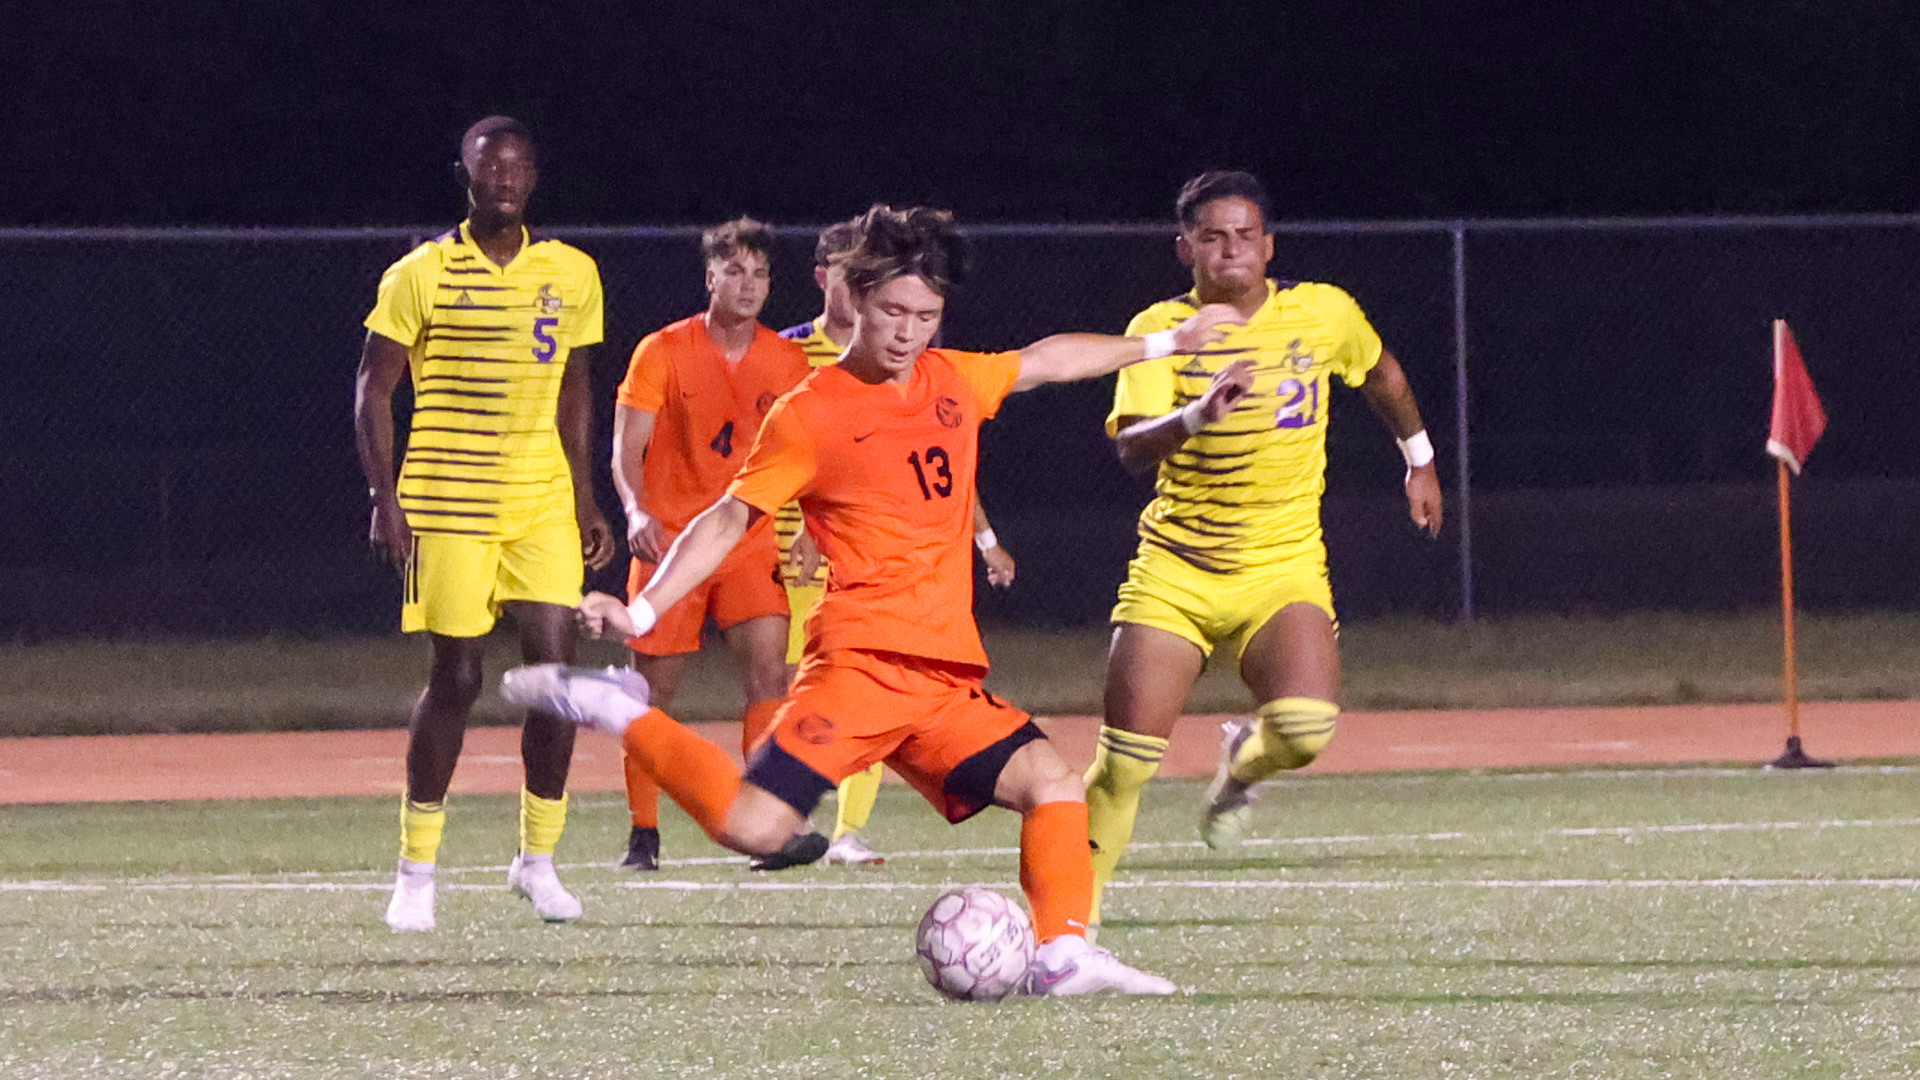 Fast start leads Tiger soccer team to 4-2 home win